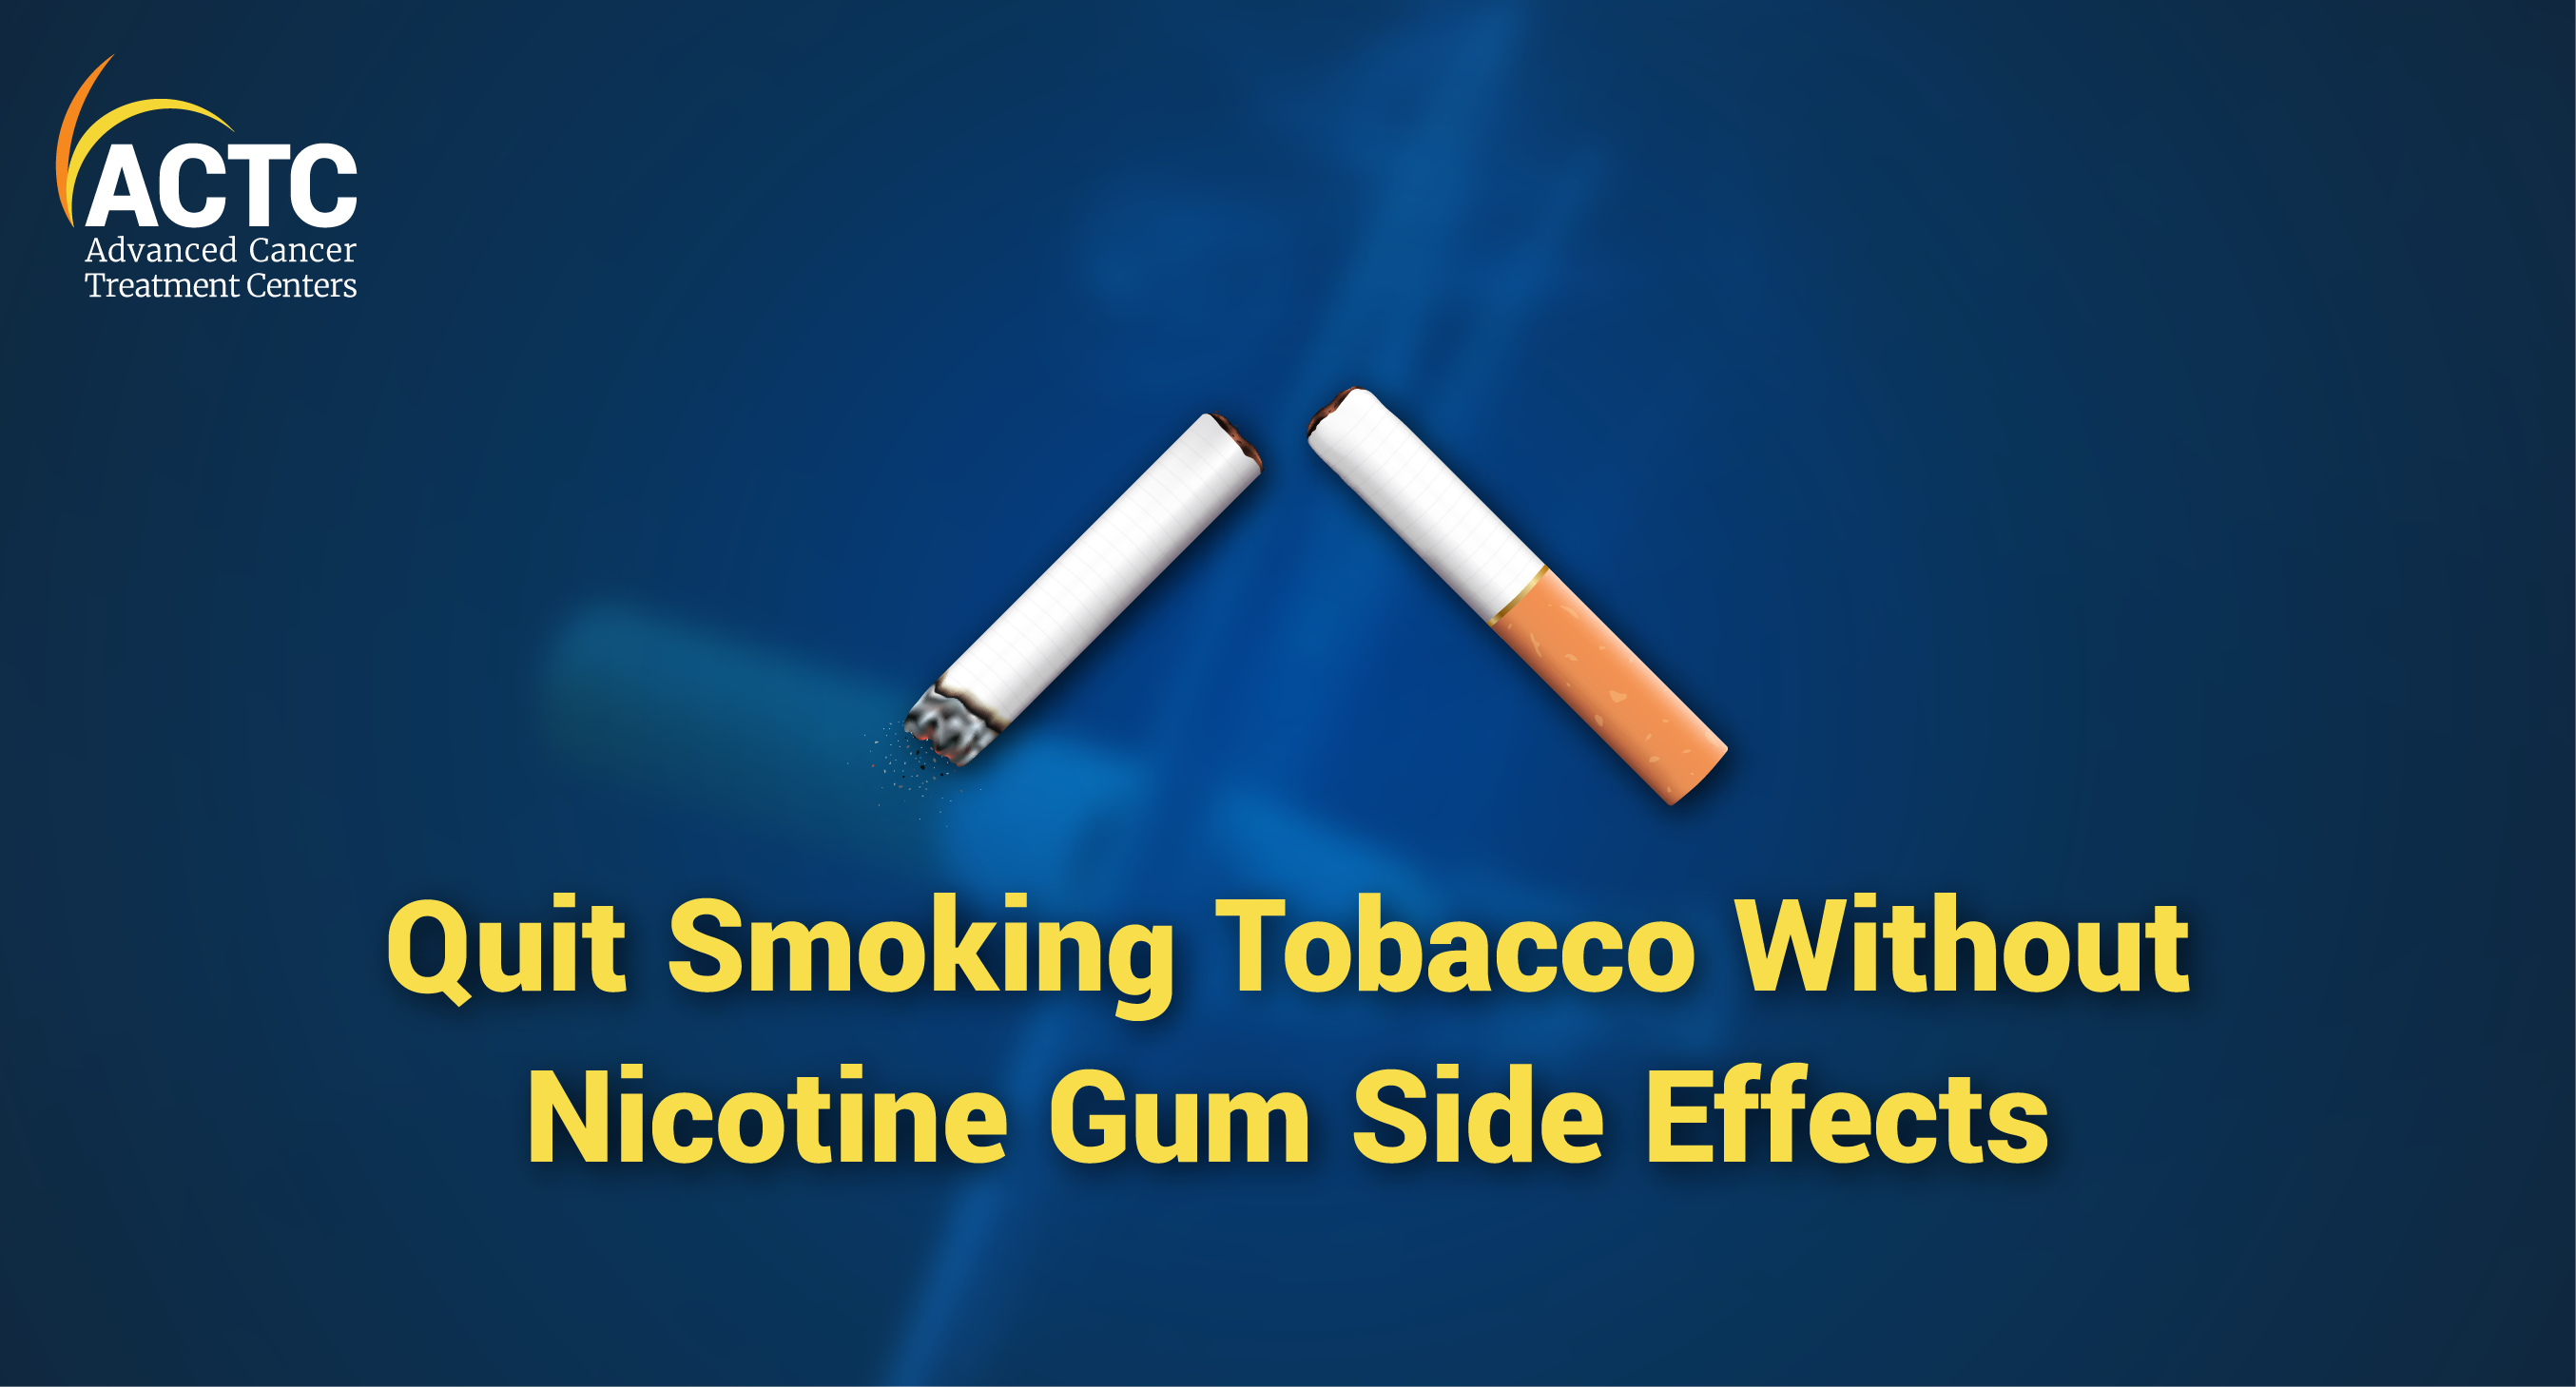 Quit Smoking Tobacco Without Nicotine Gum Side Effects